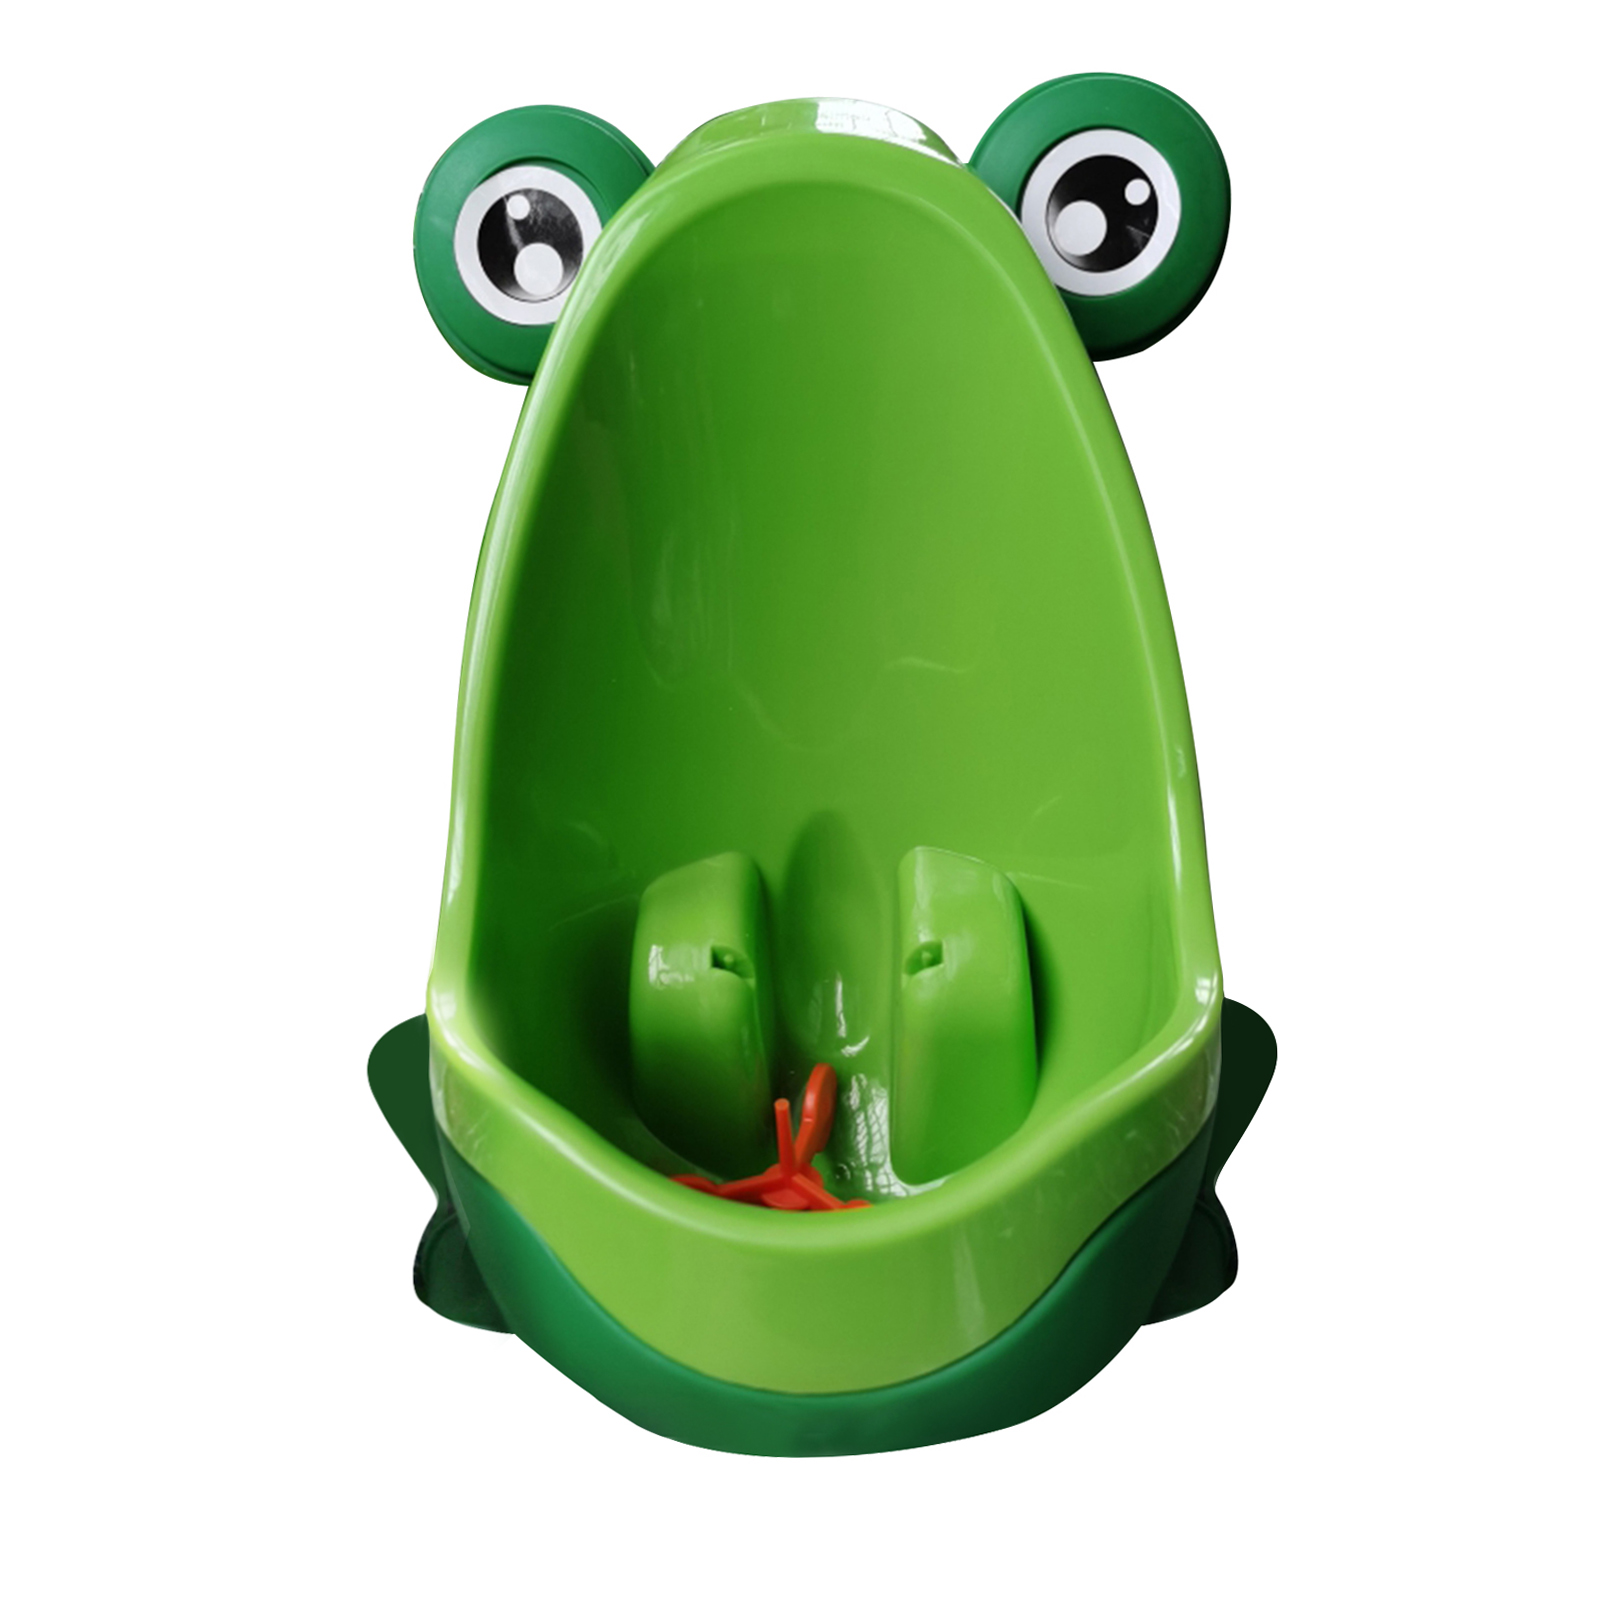 Toddler Boy Portable Toilet Frog Potty Urinal Stand Up Pee Training-Green